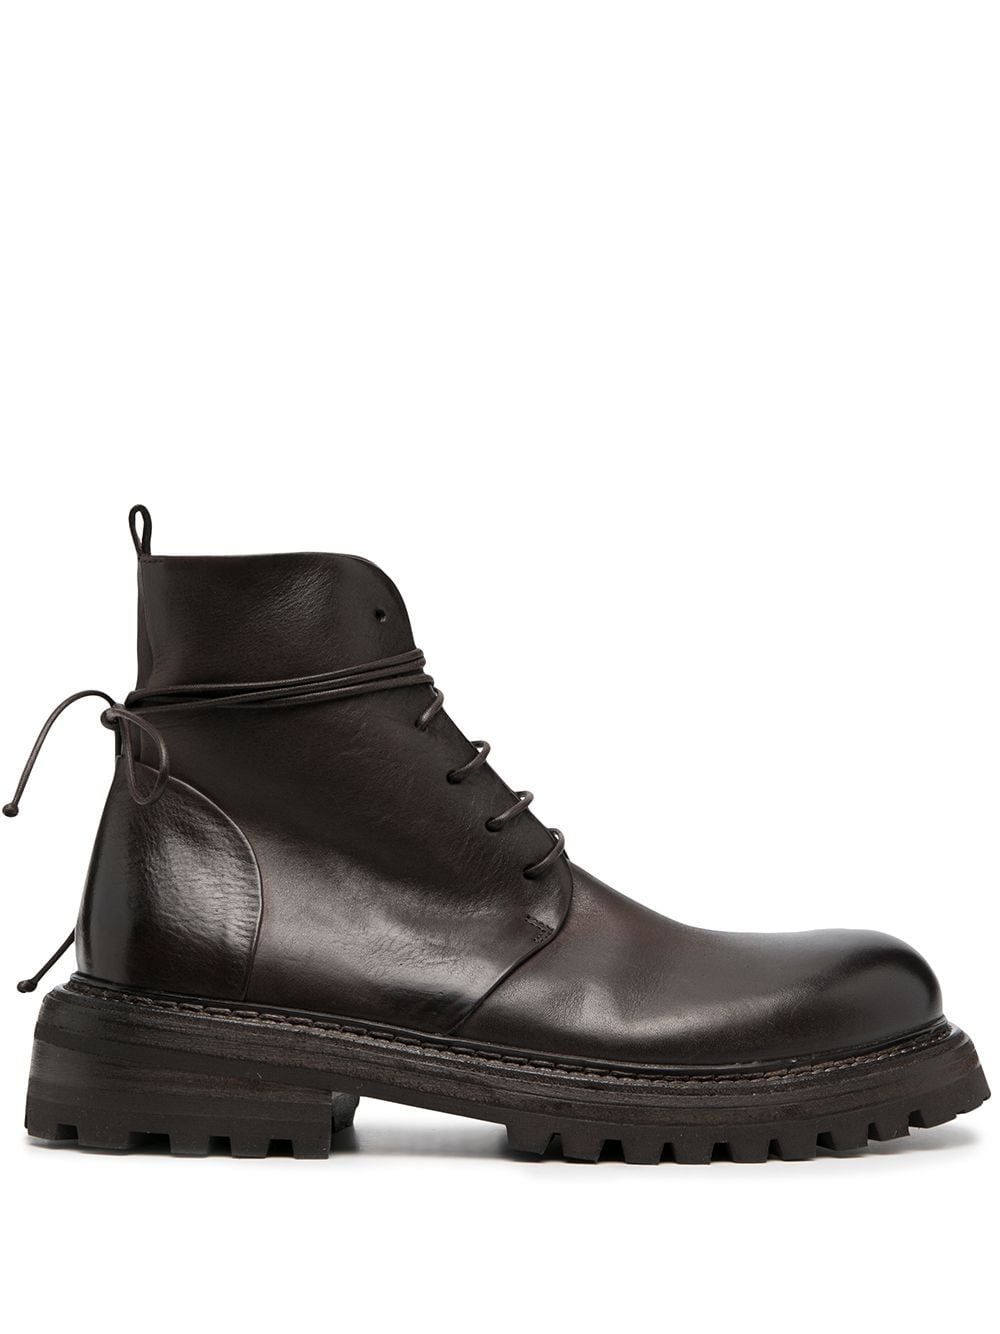 Marsèll military-style lace-up boots - Brown von Marsèll